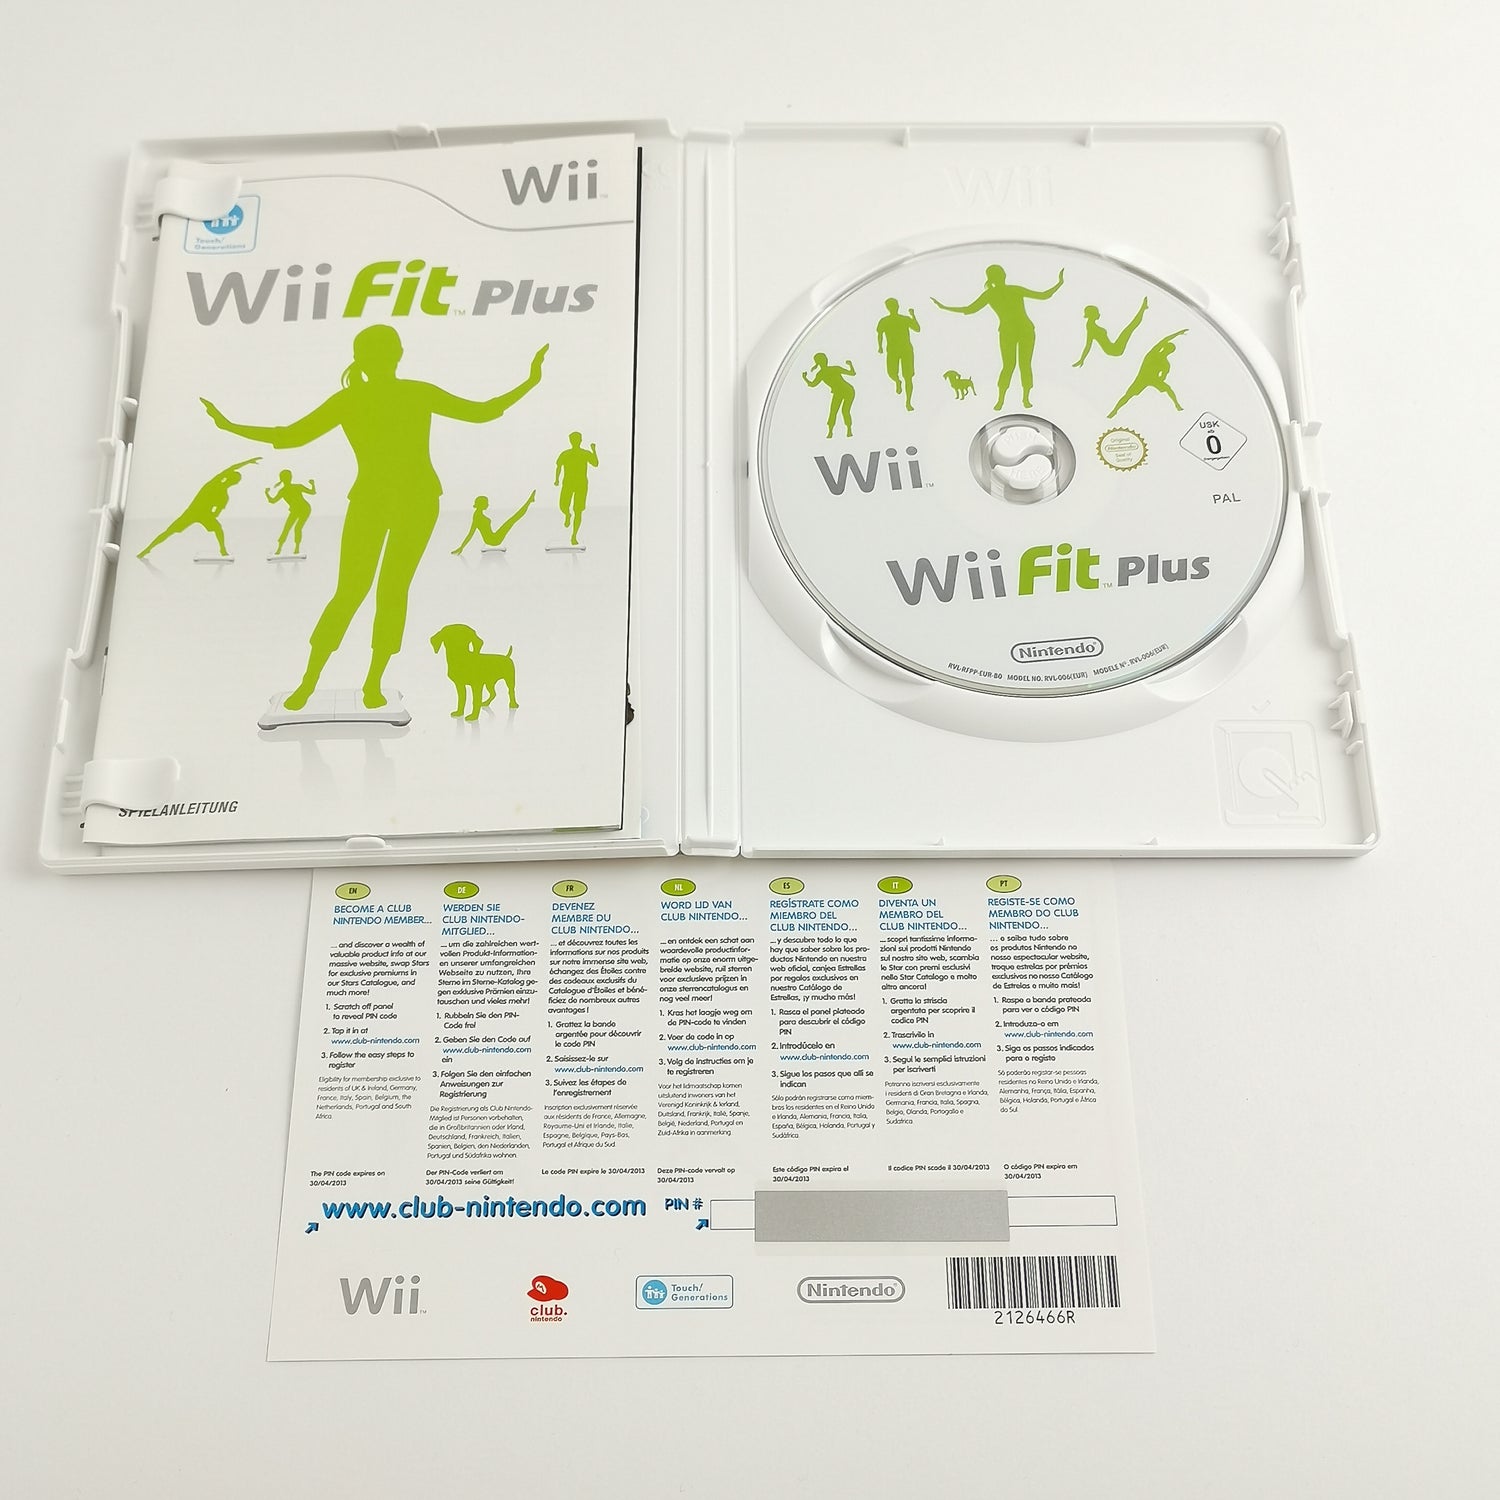 Nintendo Wii games: Wii Fit & Wii Fit plus with balance board instructions | Original packaging